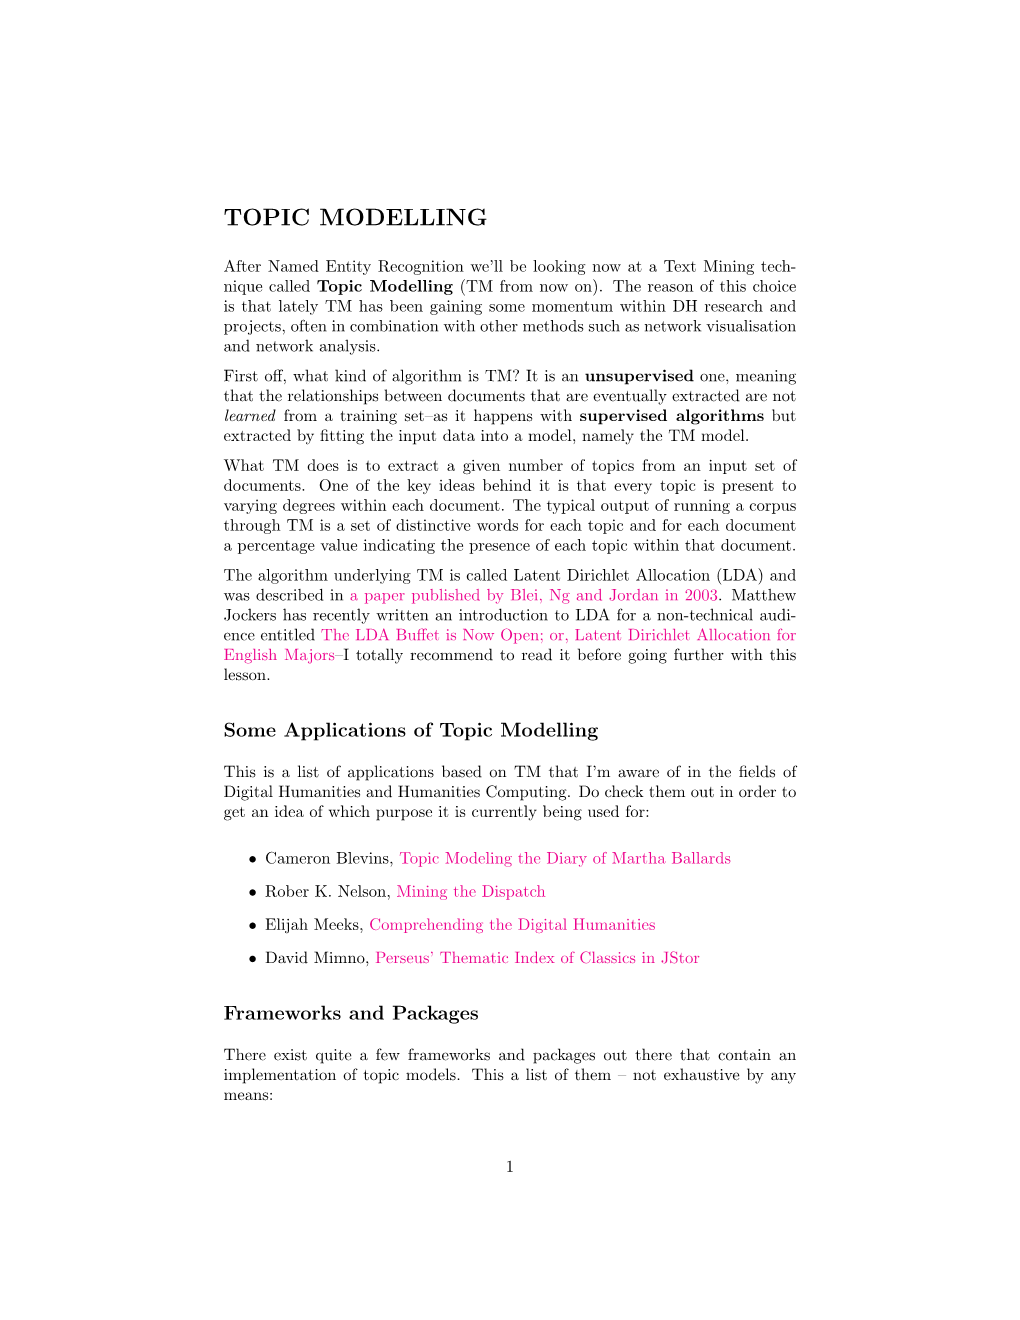 Topic Modelling